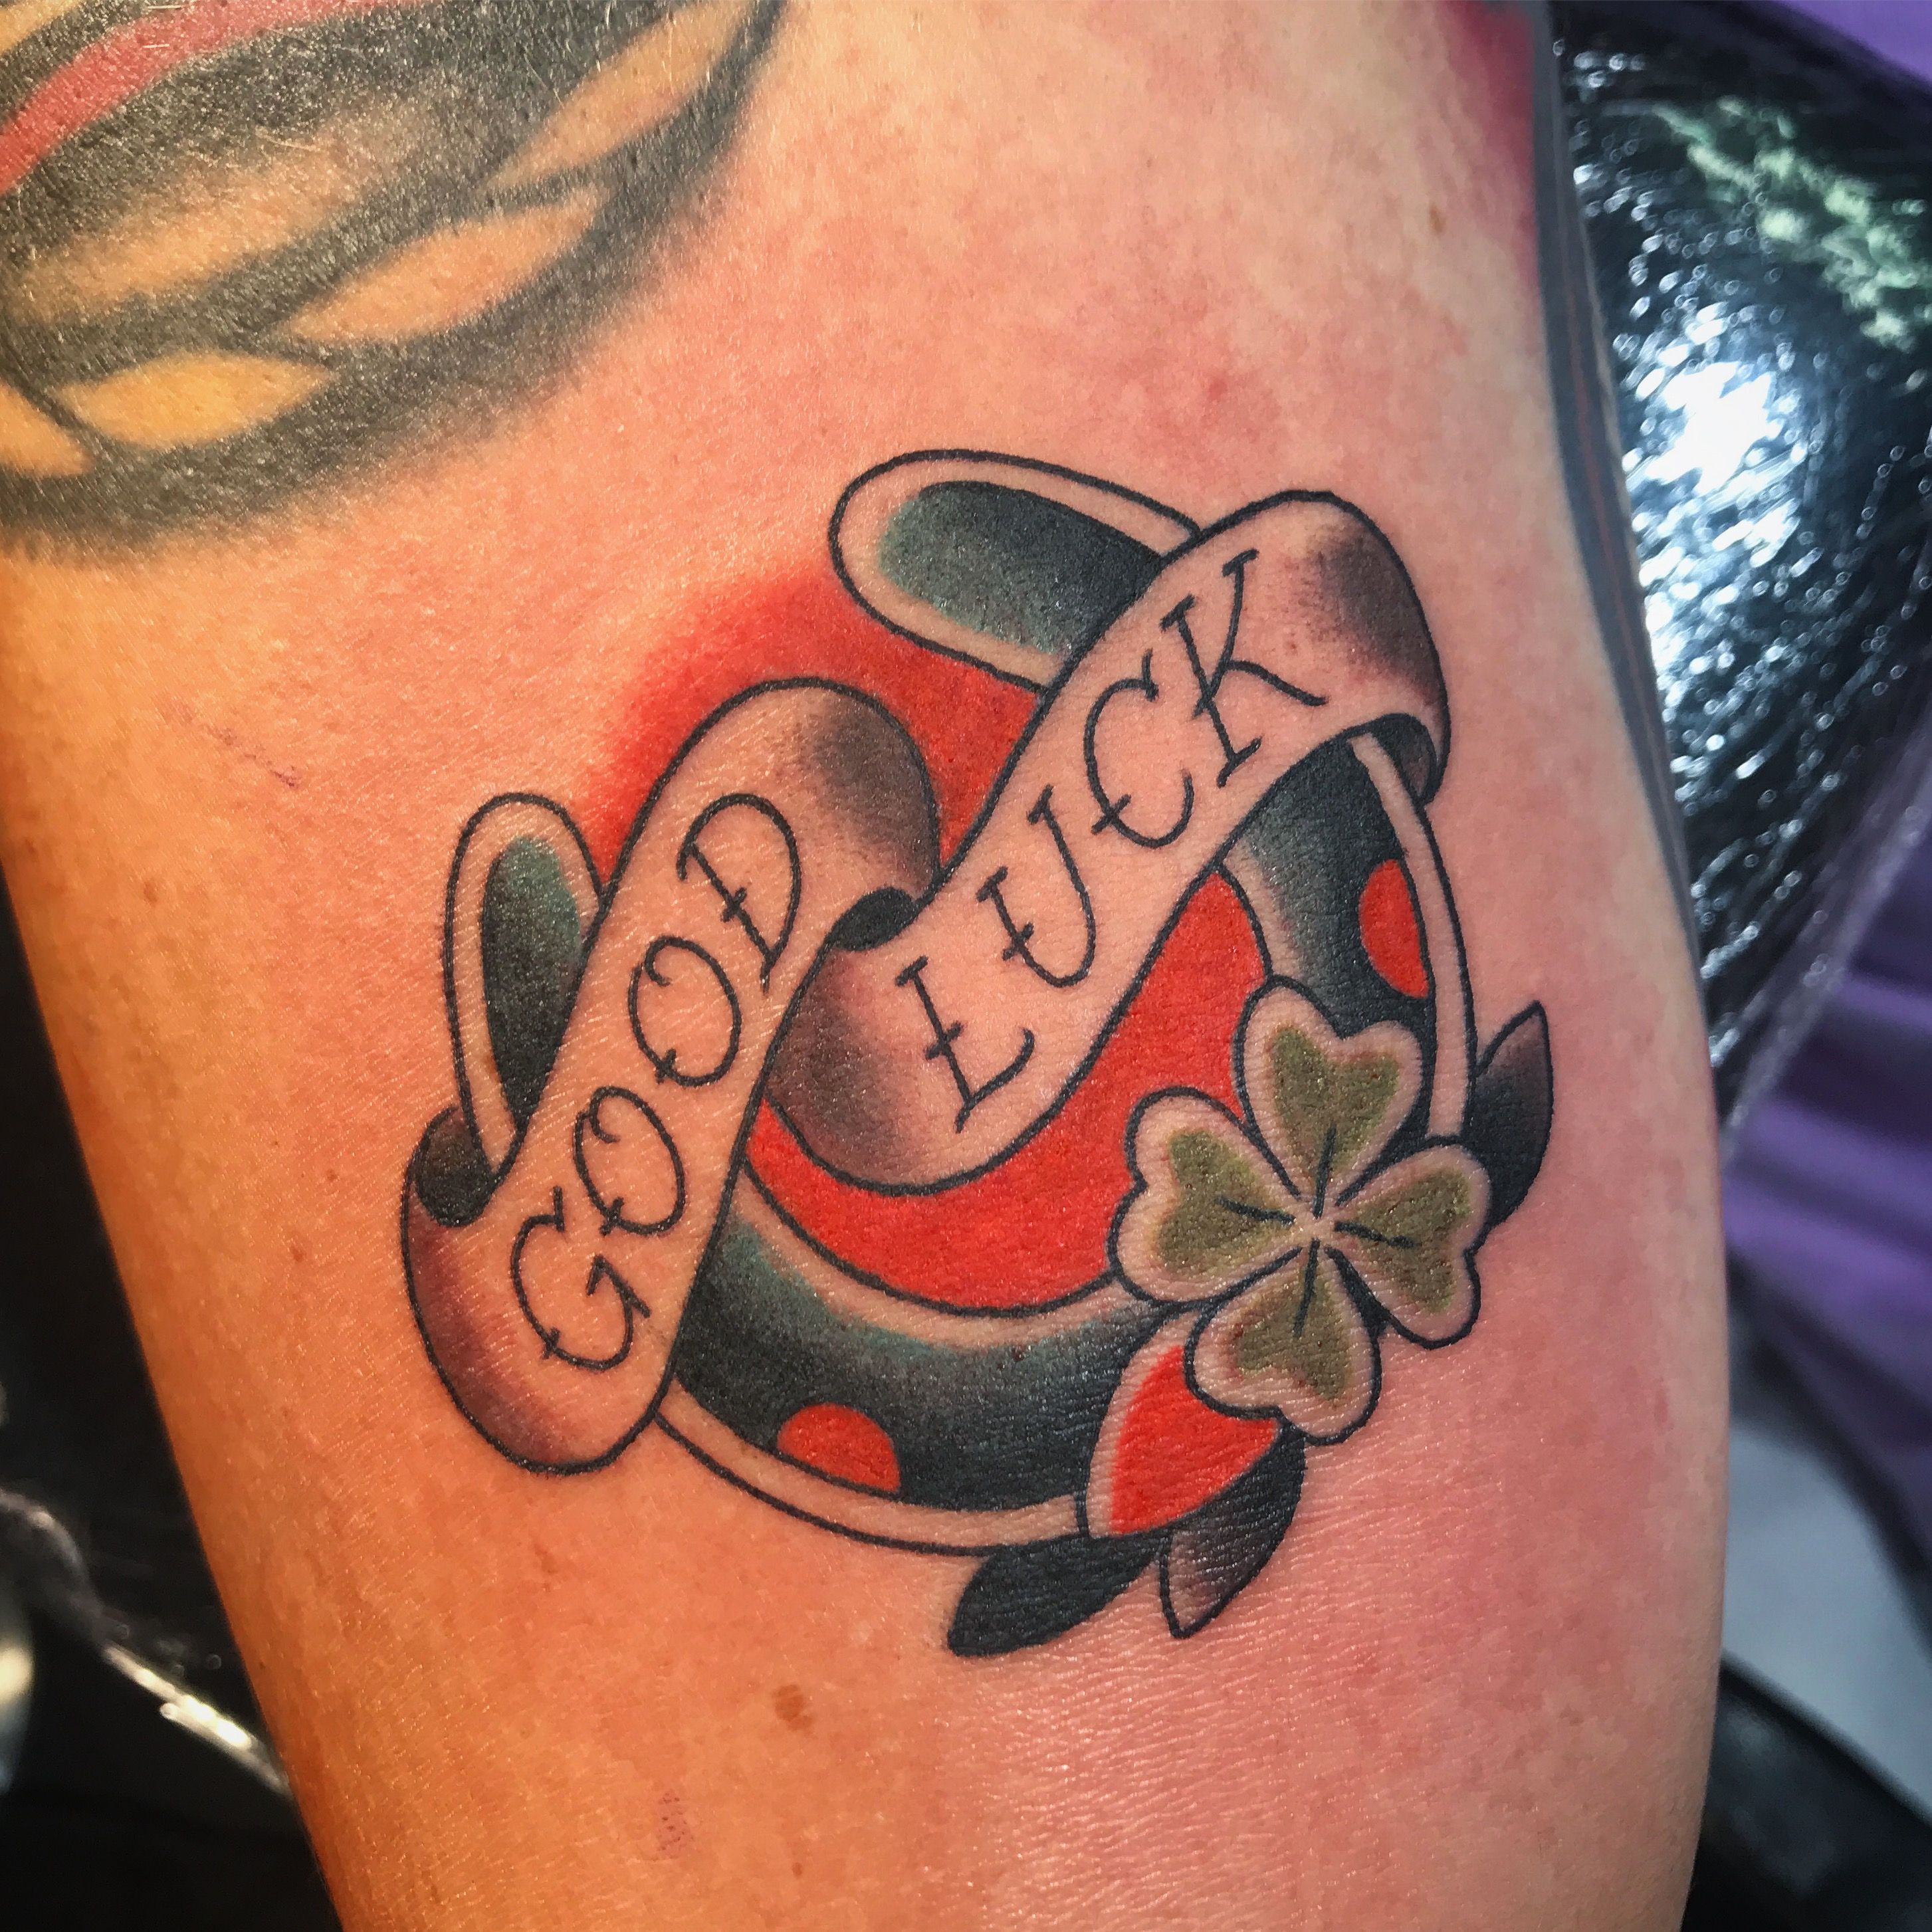 60 Best Good Luck Tattoos and Their Meanings  Saved Tattoo